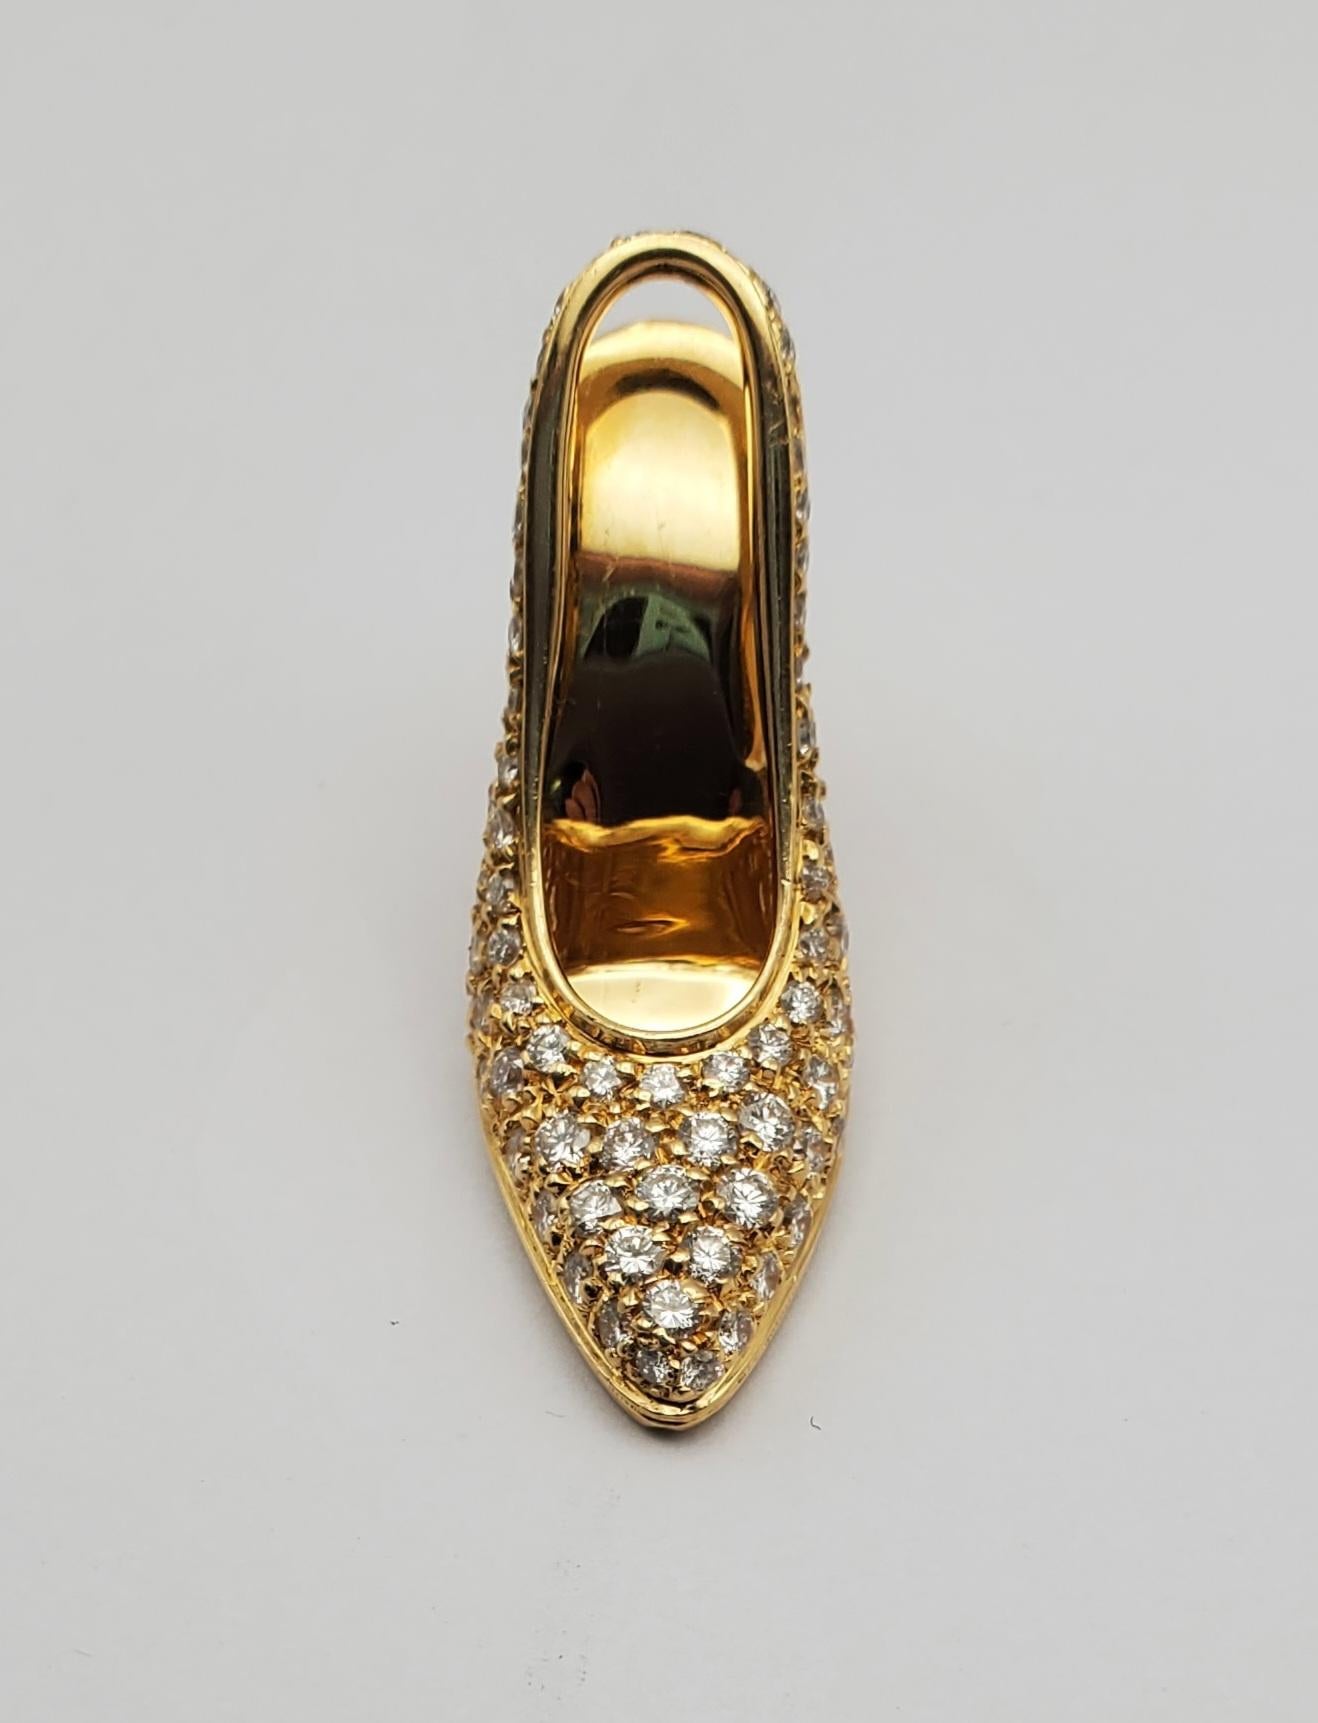 Mulberry stiletto shoe pendant featuring pavé set round brilliant cut diamonds. The diamonds are F color and VS quality with a total weight of 1.00cts. The sole of the shoe is stamped 750, 2500AL and the signature Mulberry tree. The shoe pendant can